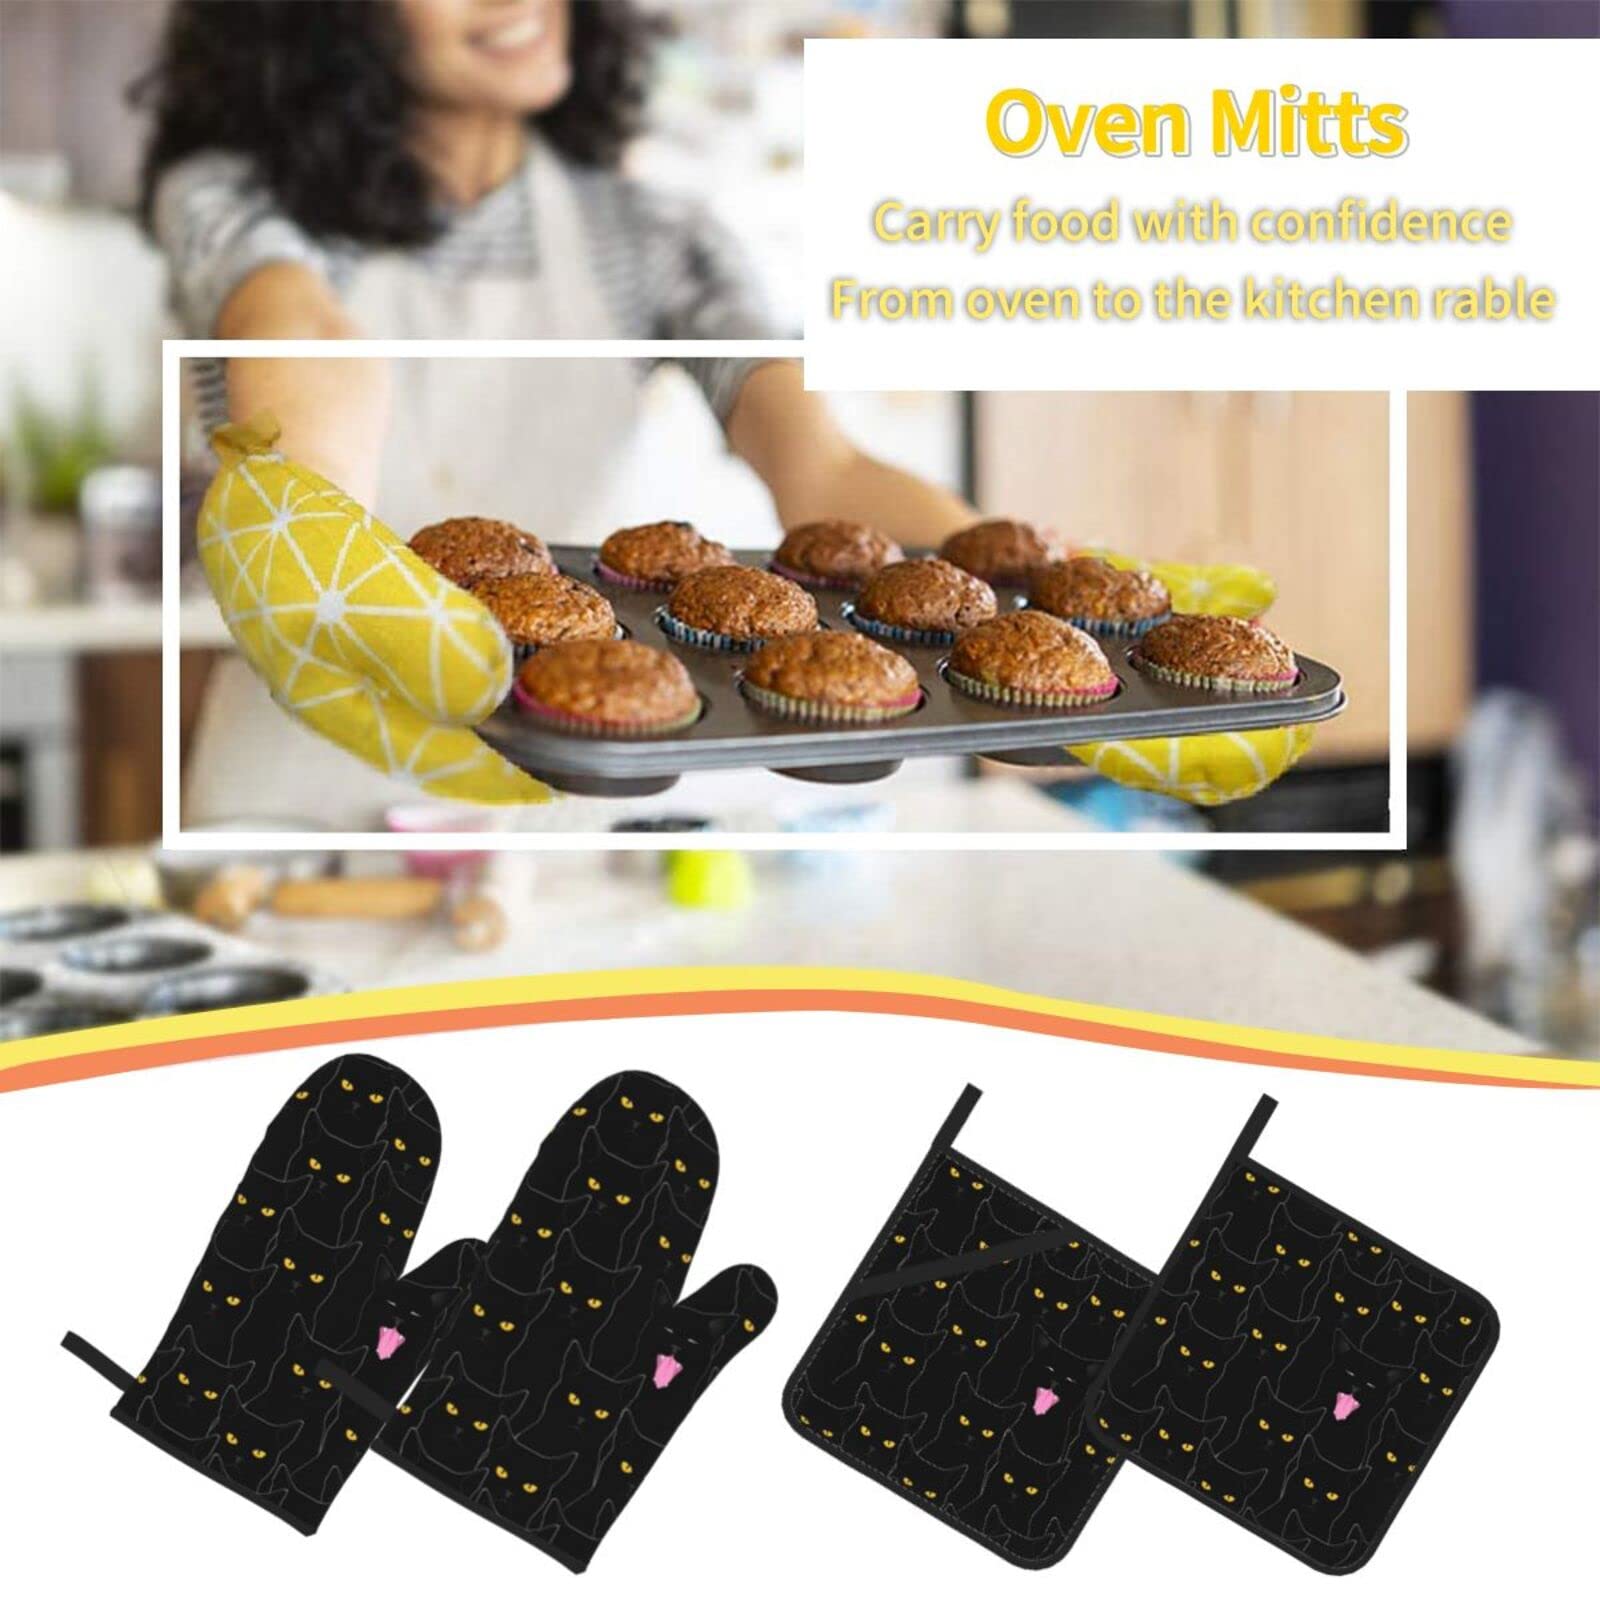 Black Cat Oven Mitts and Pot Holders Sets, Non-Slip Heat Resistant Gloves Potholders Pot Pads for Kitchen Cooking Baking Grilling BBQ(4-Piece Set)